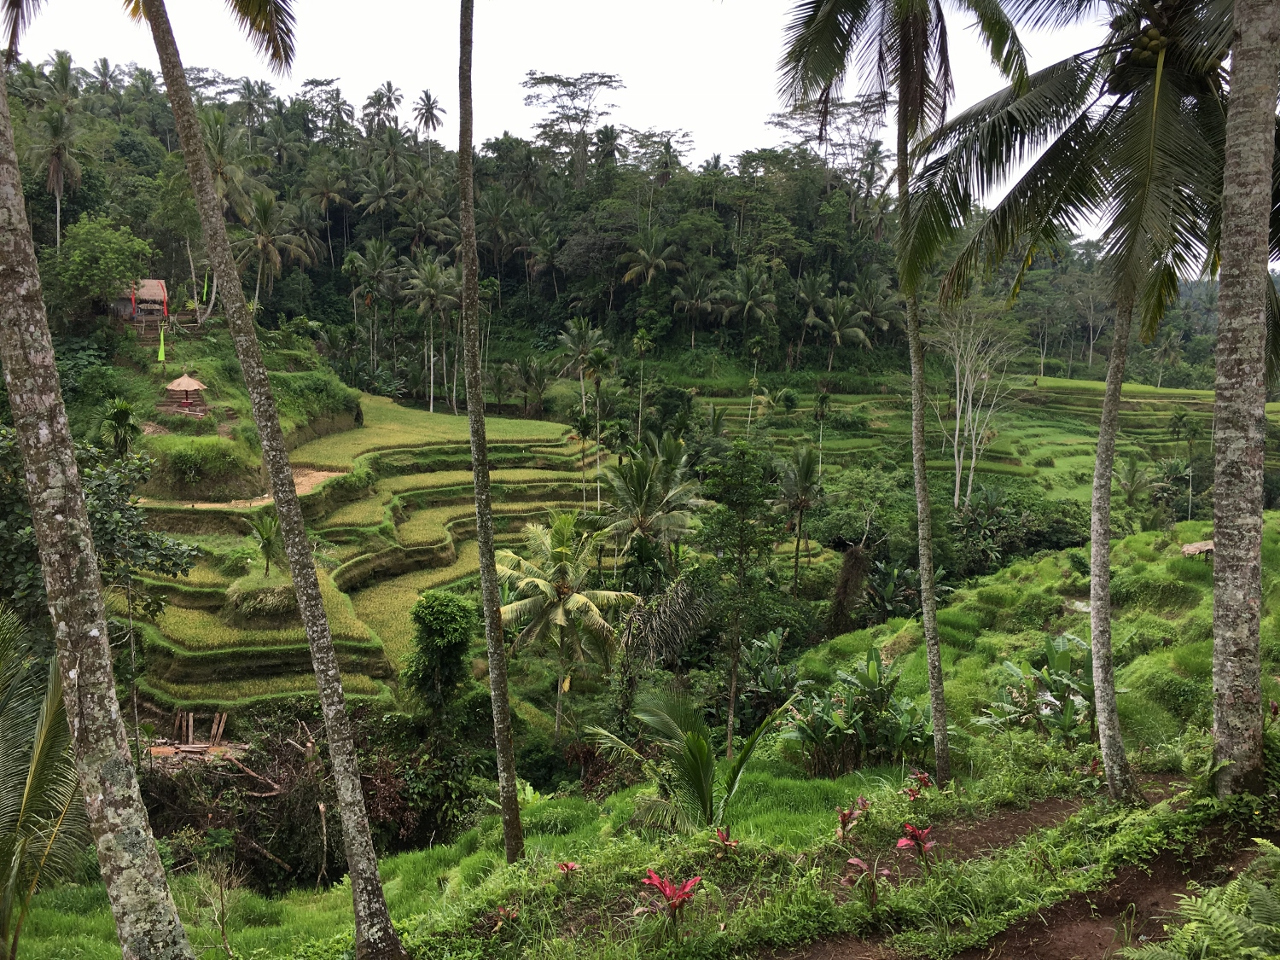 The famous Tegalalang rice terraces in Ubud are simply stunning. Discover the top places to visit in ubud from this 2 days in Ubud itinerary. #ubuditinerary #ubudguide #baliindonesia #balitravel #bali #baliholiday #balinese #ubud